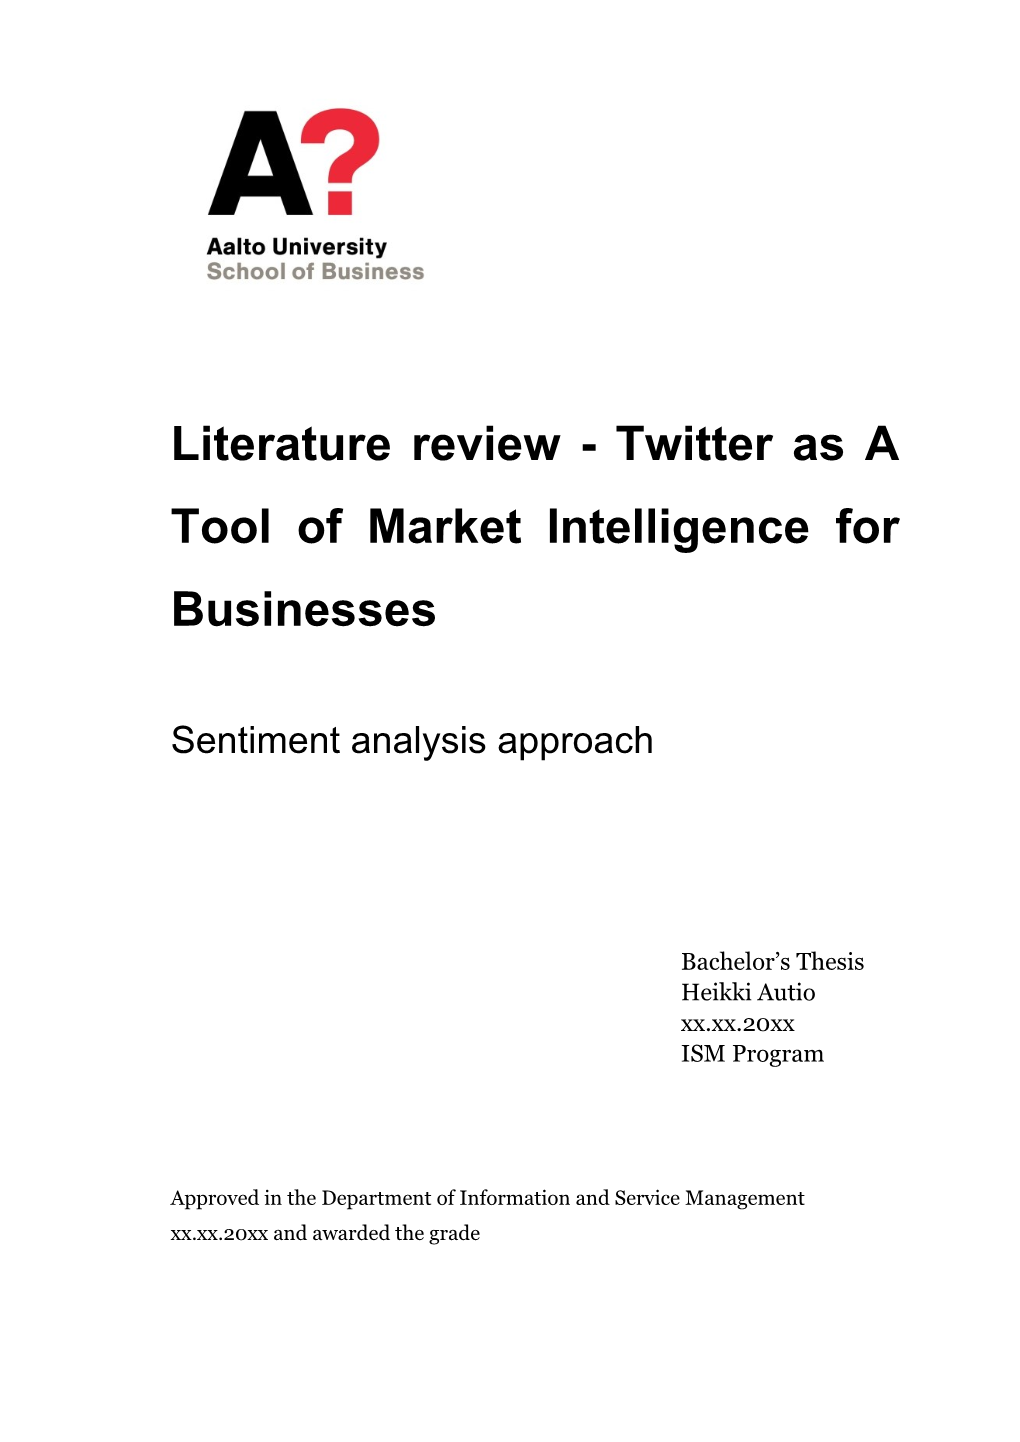 Literature Review - Twitter As a Tool of Market Intelligence for Businesses